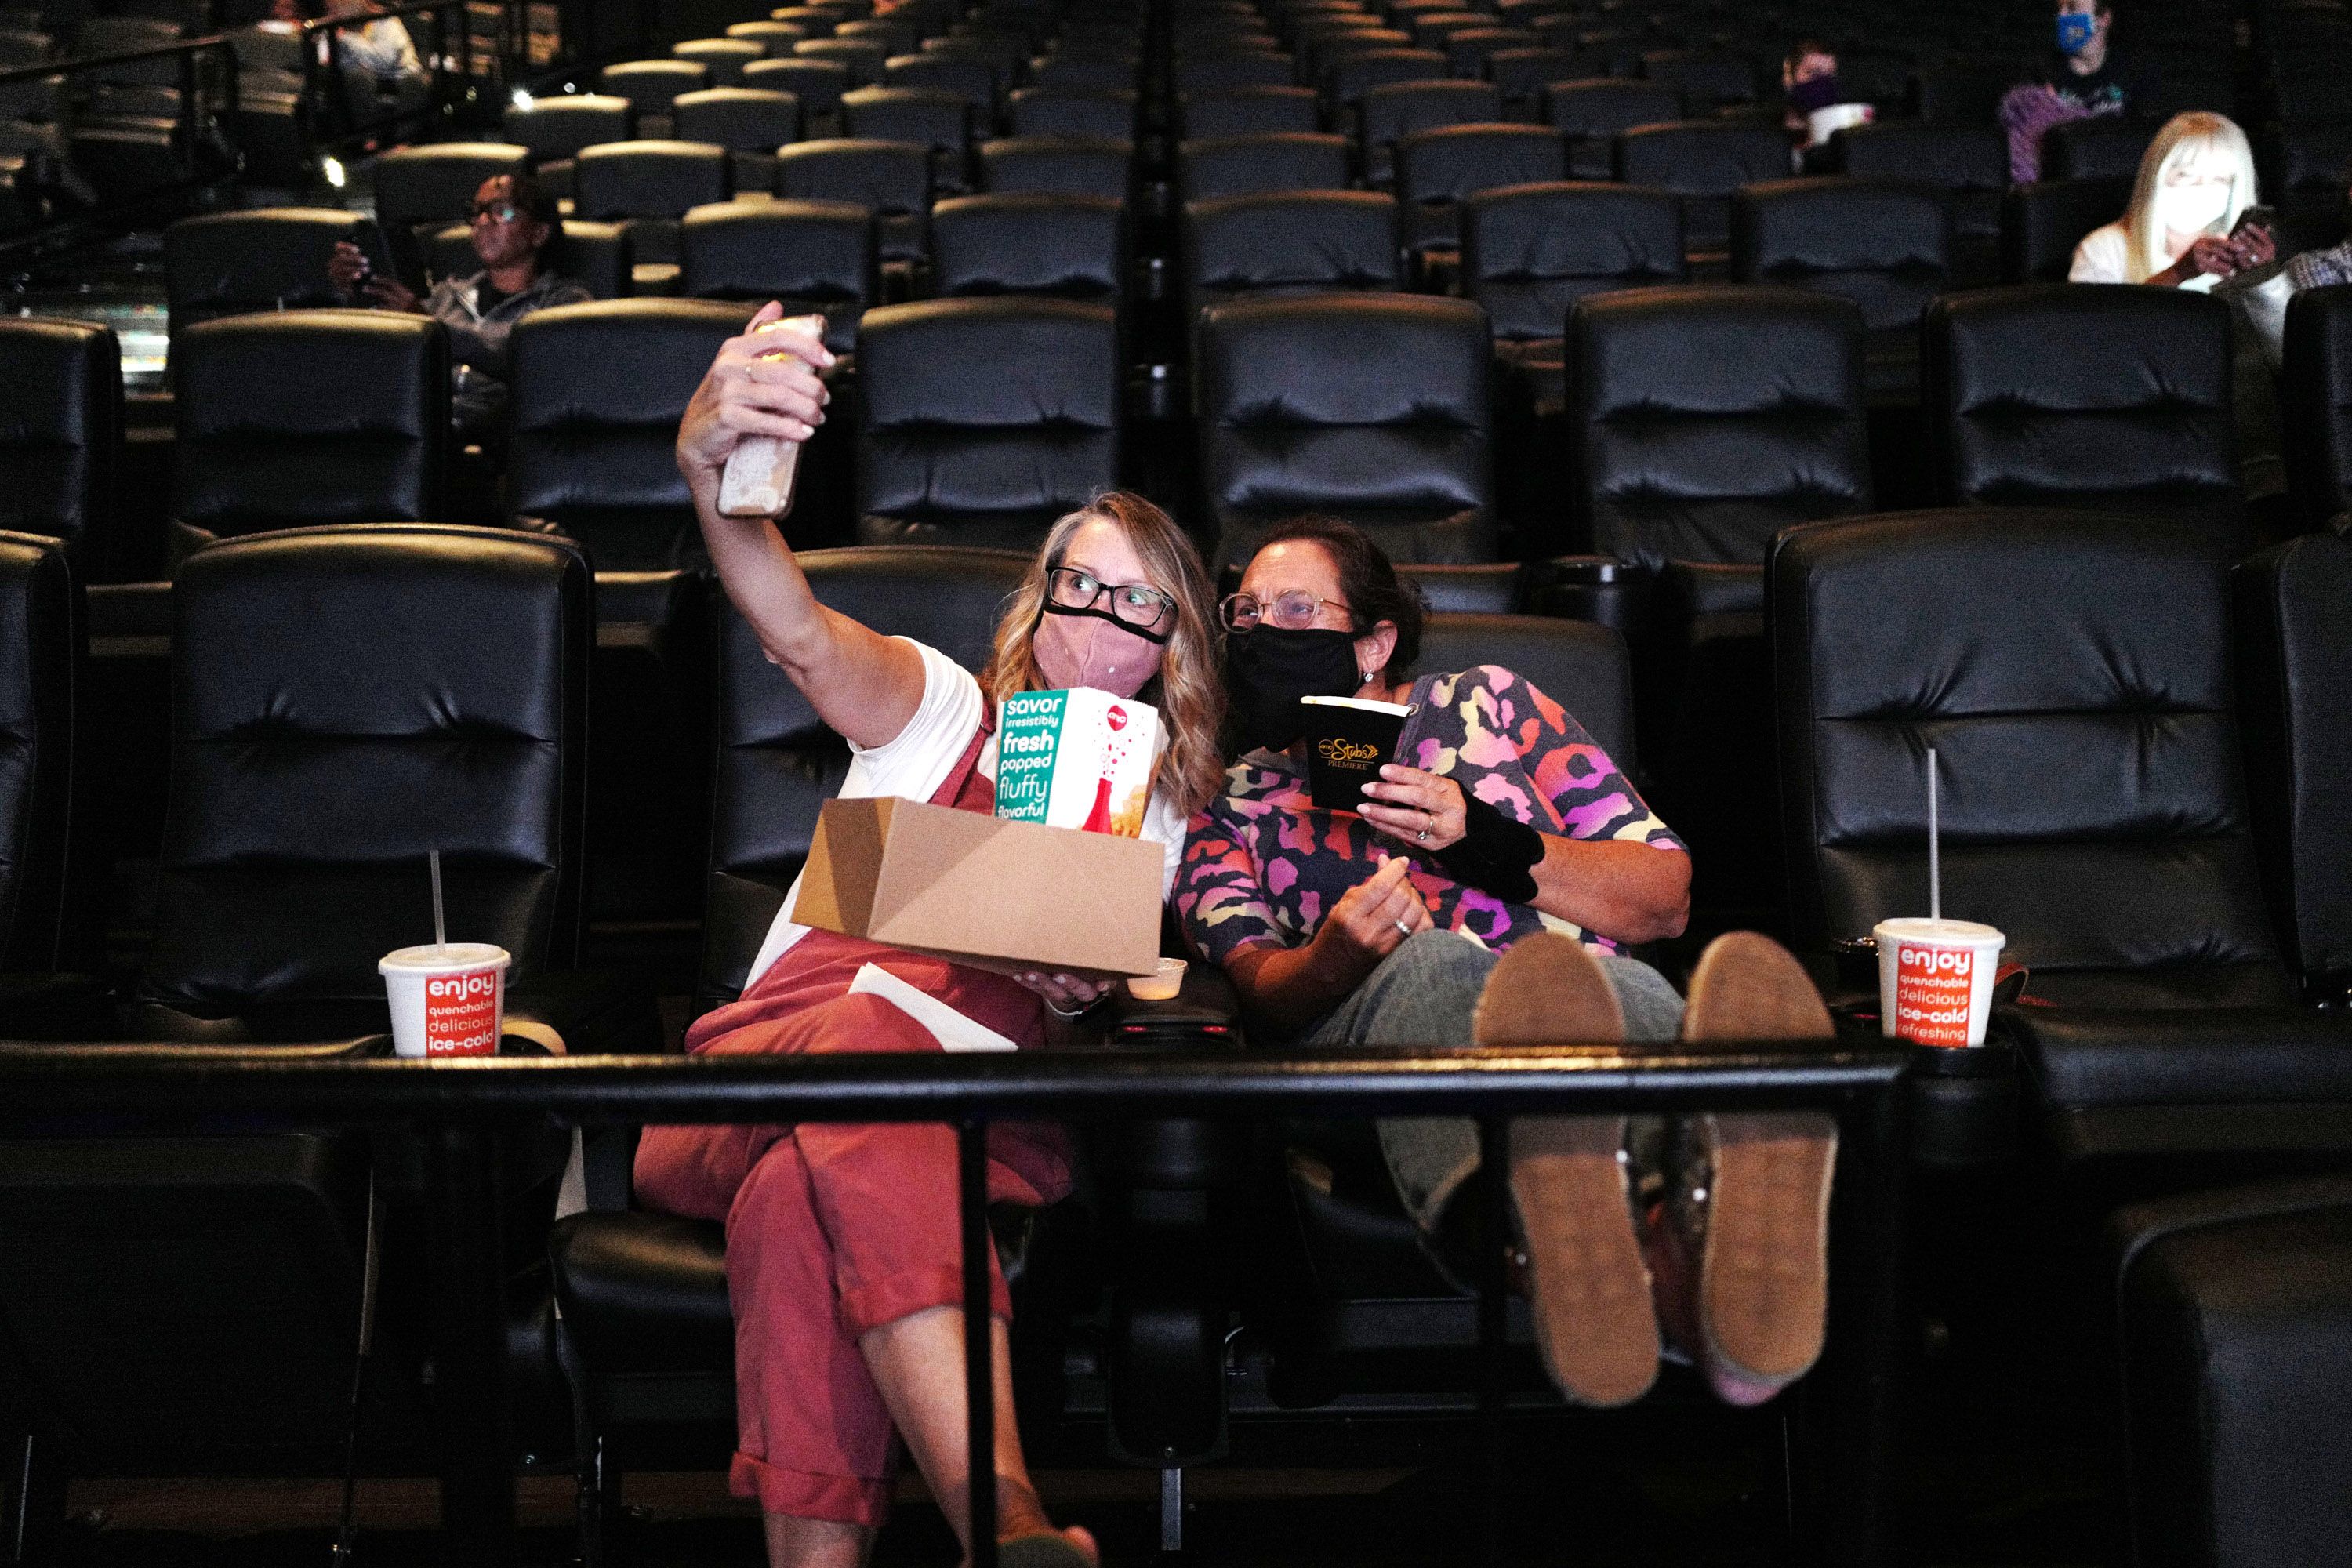 AMC Movie Theater Reopening Photos - Movie Theaters Open With COVID-19 Safety Precautions